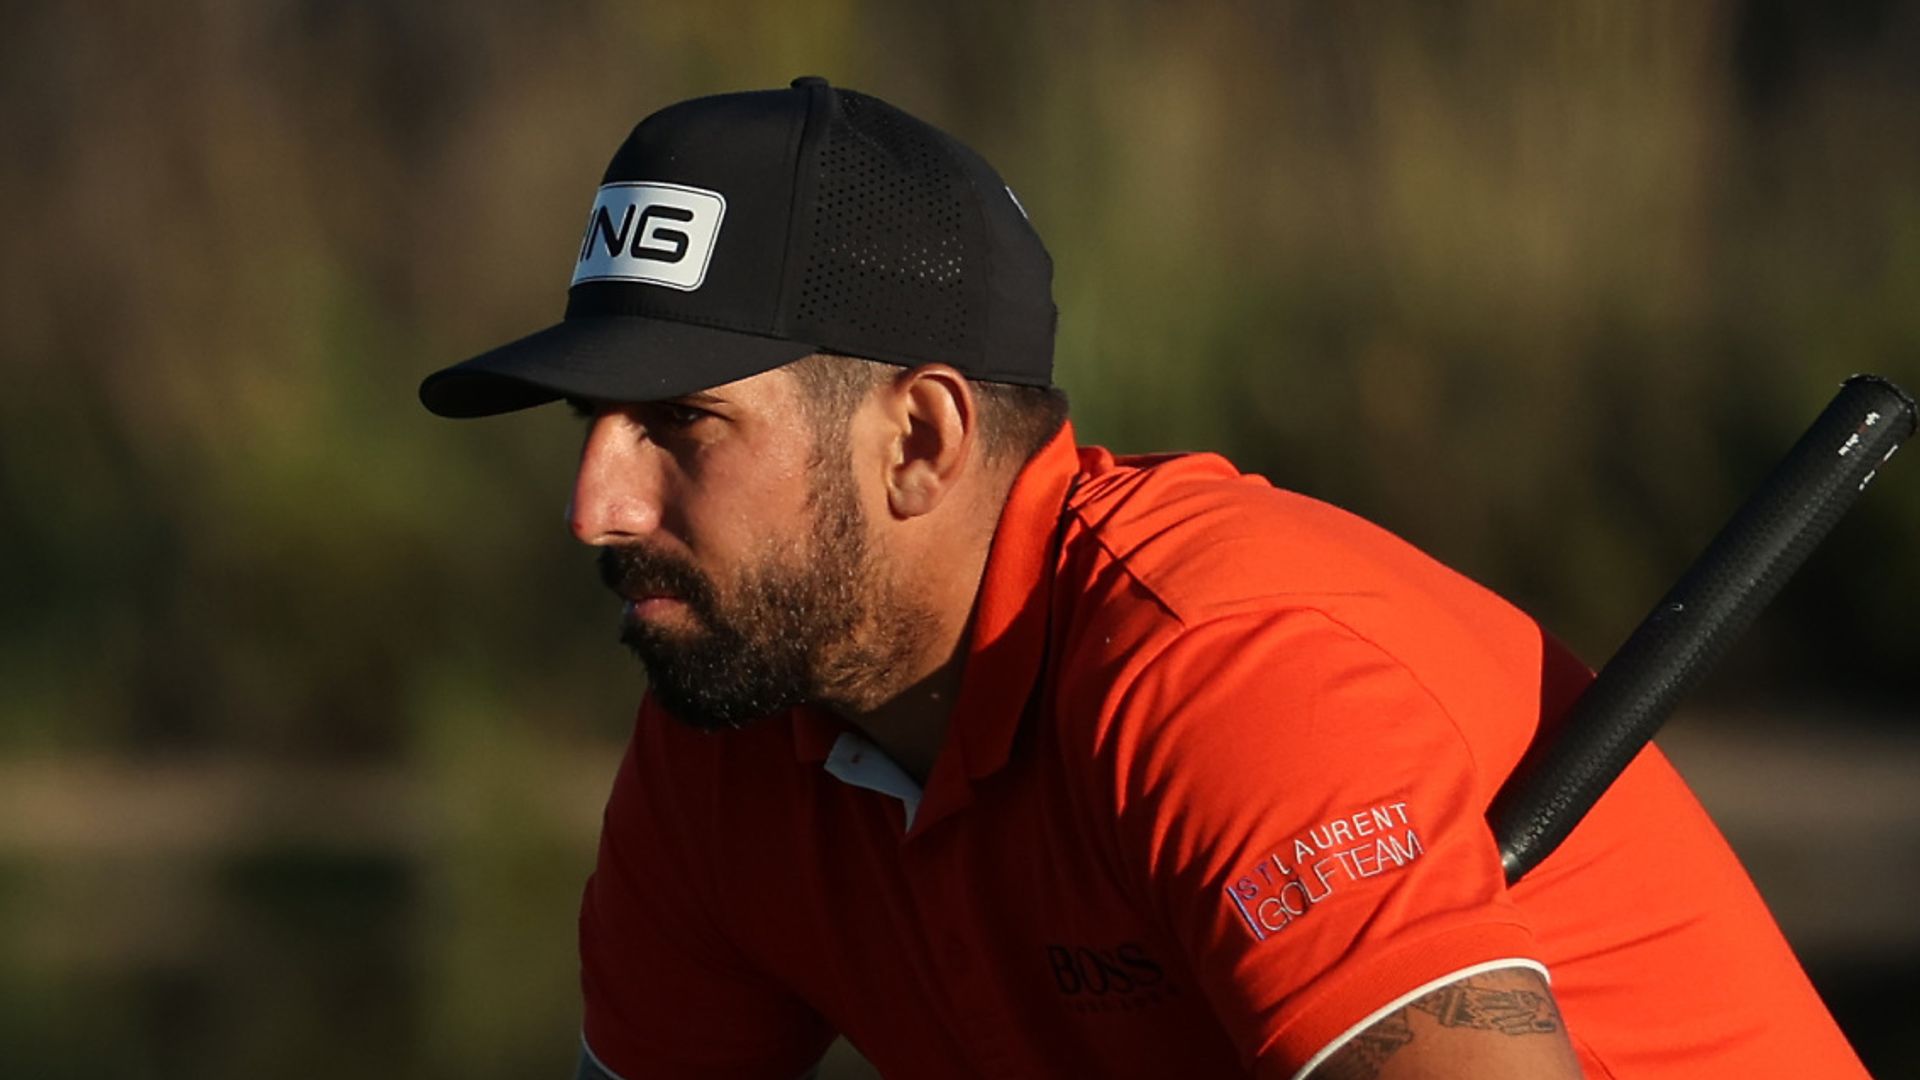 France's Pavon shoots 63 to lead Italian Open by two shots